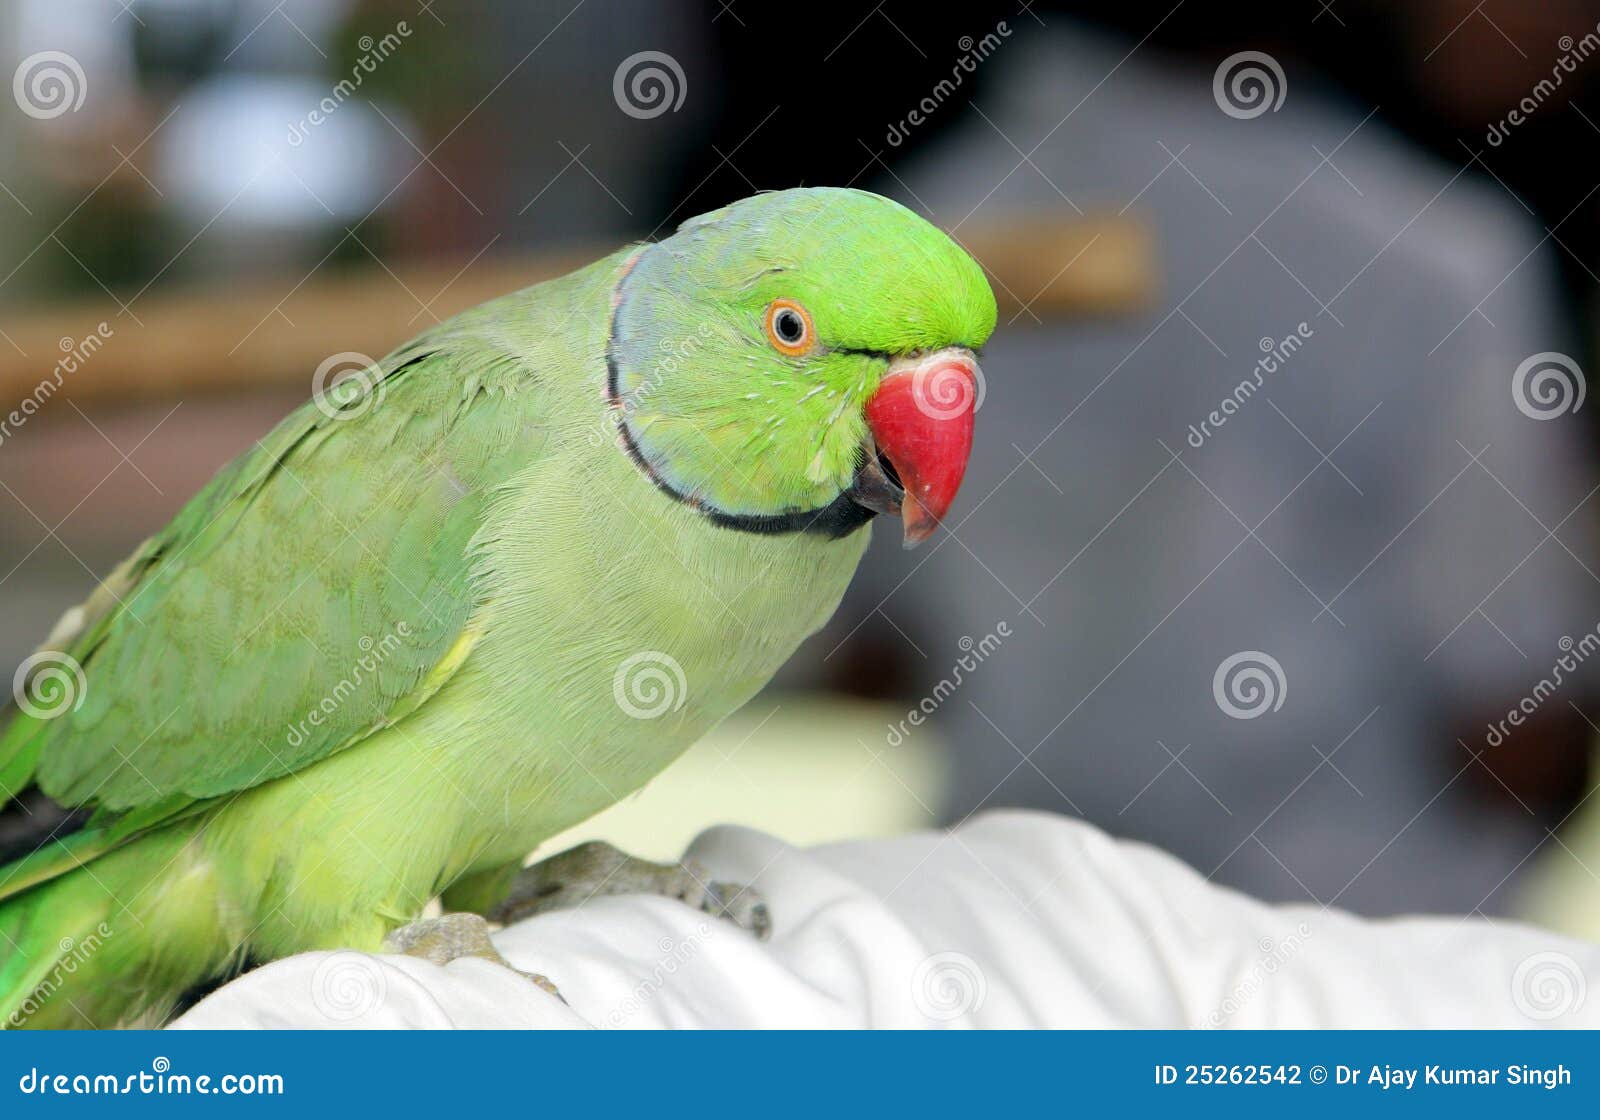 A beautiful green parrot stock photo. Image of chordata - 25262542